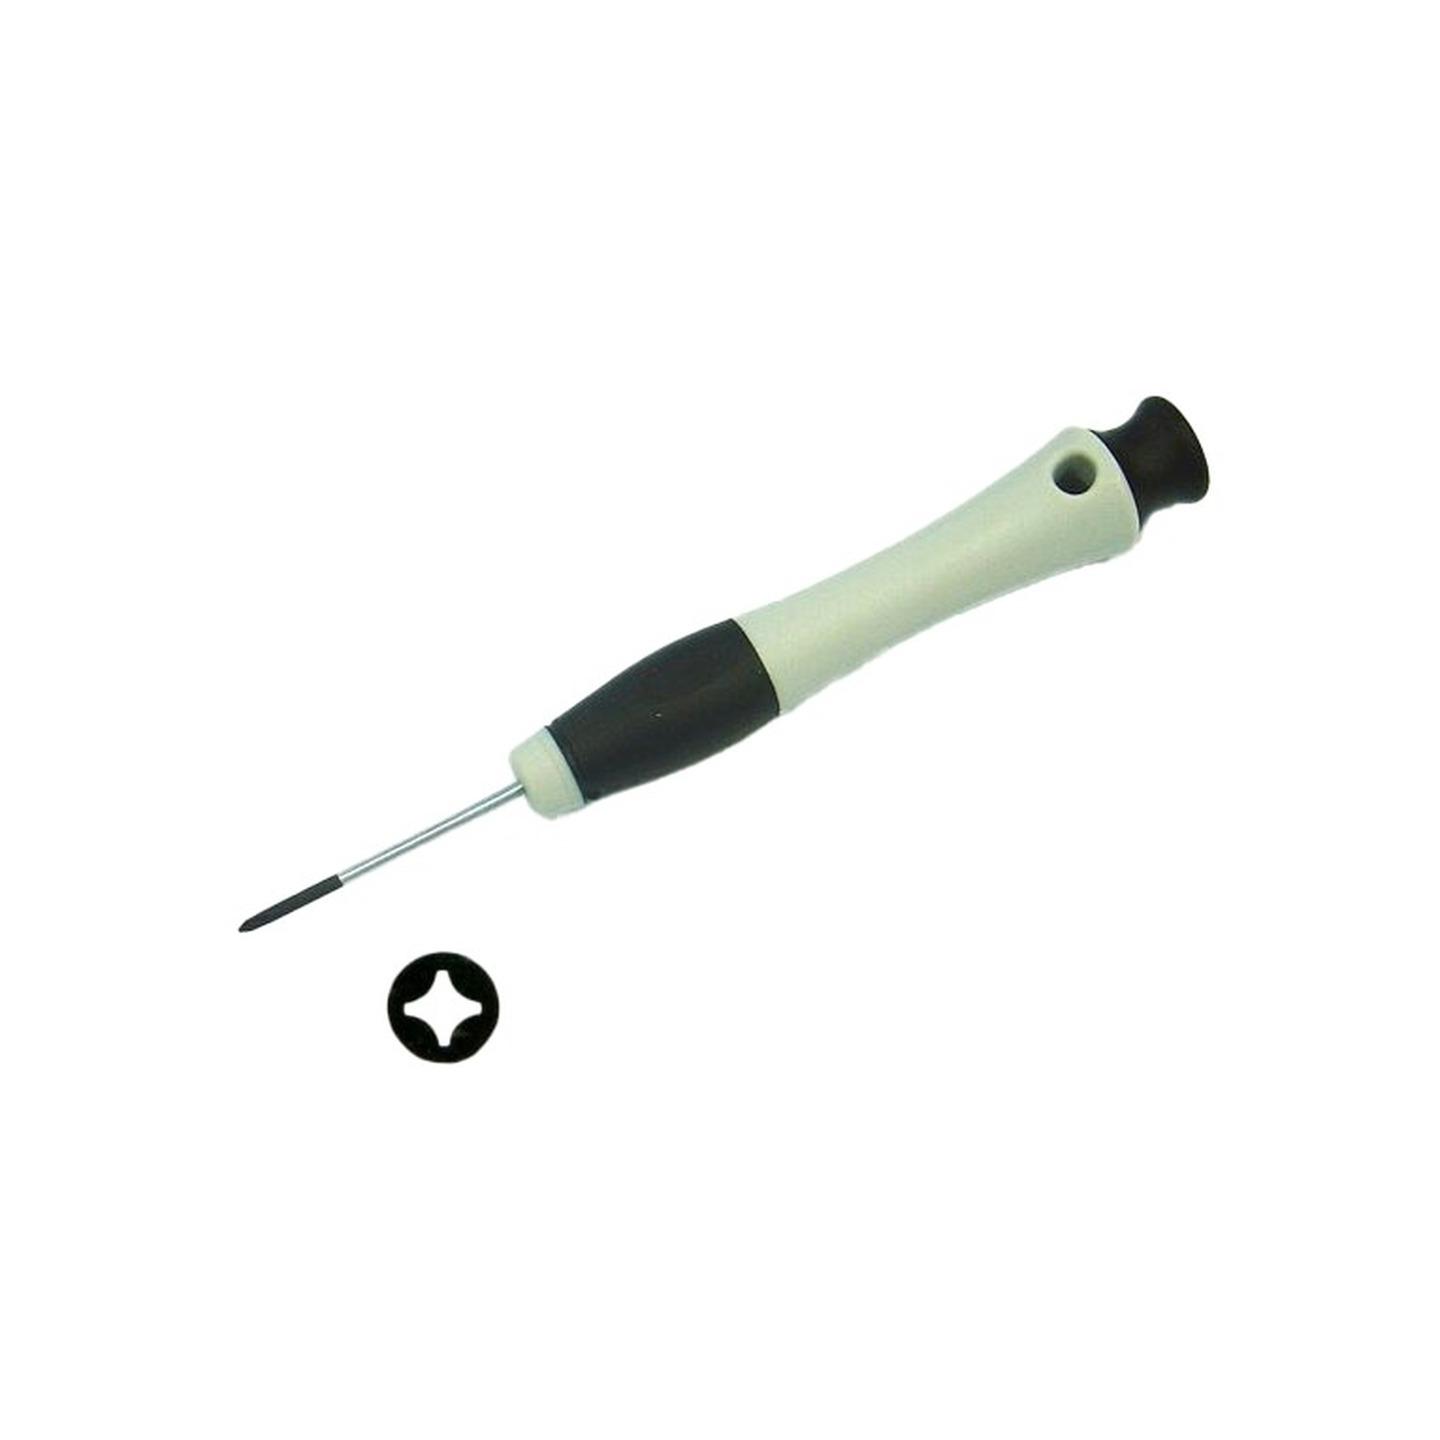 High Quality Jewellers Screwdriver - 000 Phillips